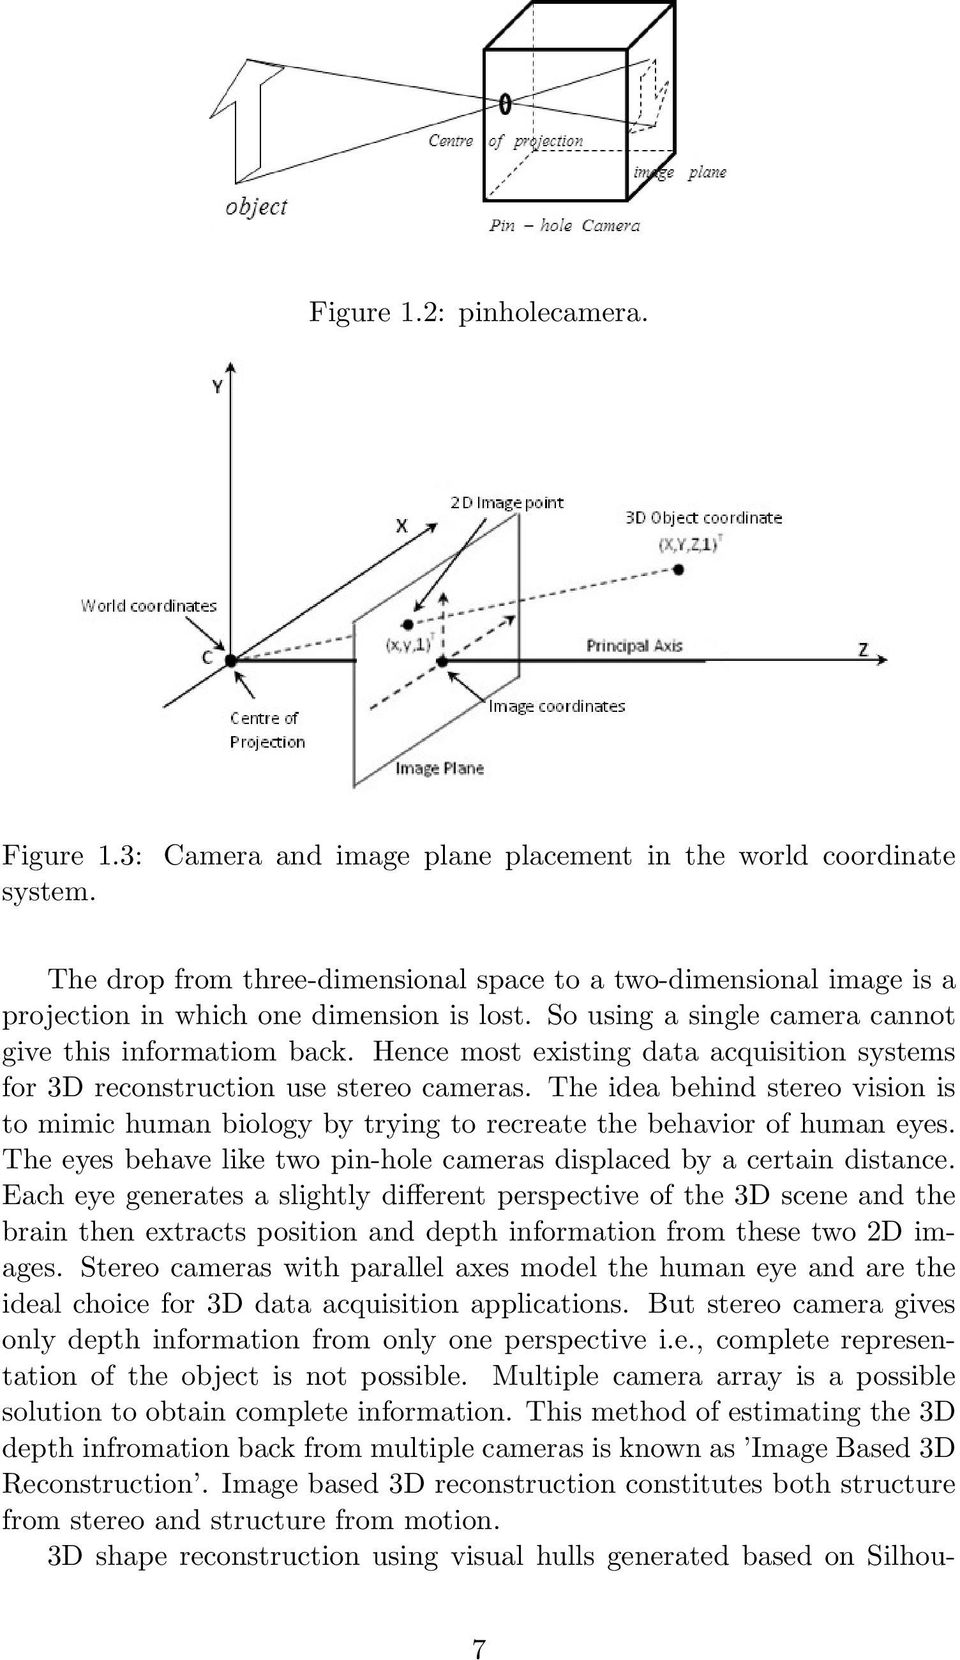 Hence most existing data acquisition systems for 3D reconstruction use stereo cameras. The idea behind stereo vision is to mimic human biology by trying to recreate the behavior of human eyes.